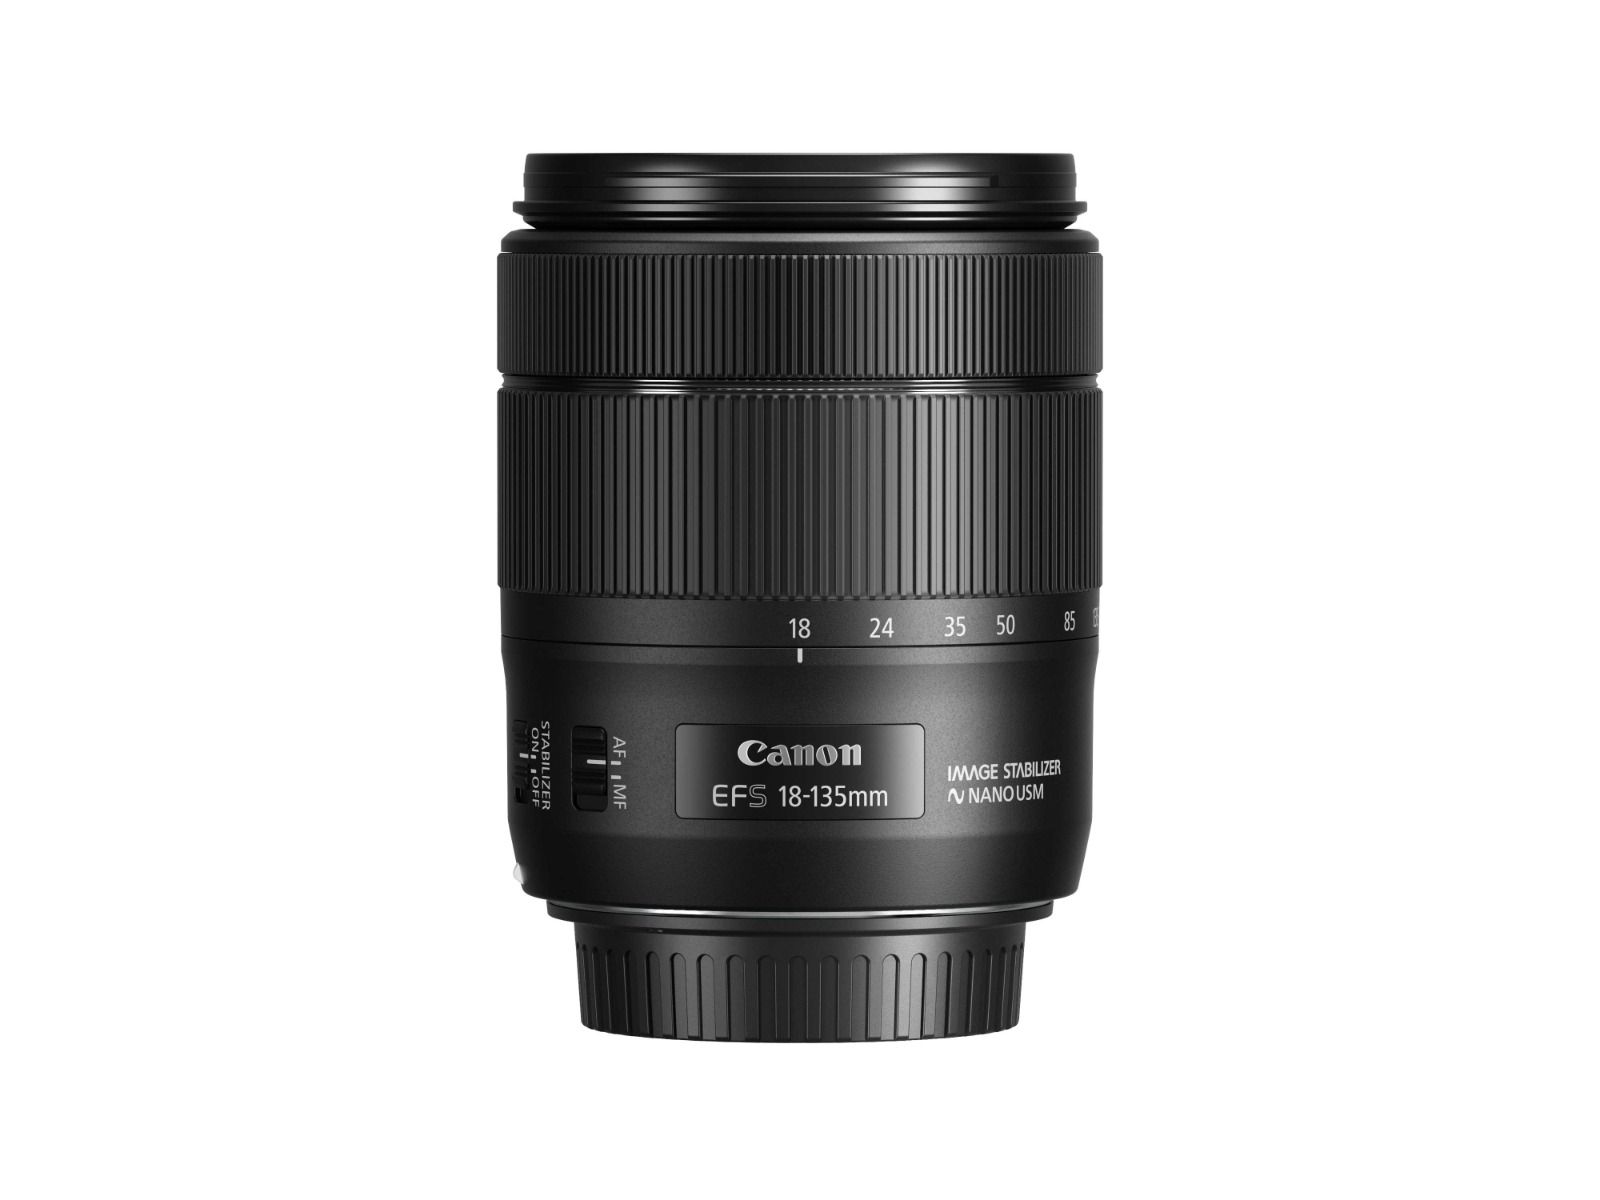 Canon 18-135MM EF-S f3.5-5.6 IS USM Lens - Product Photo 2